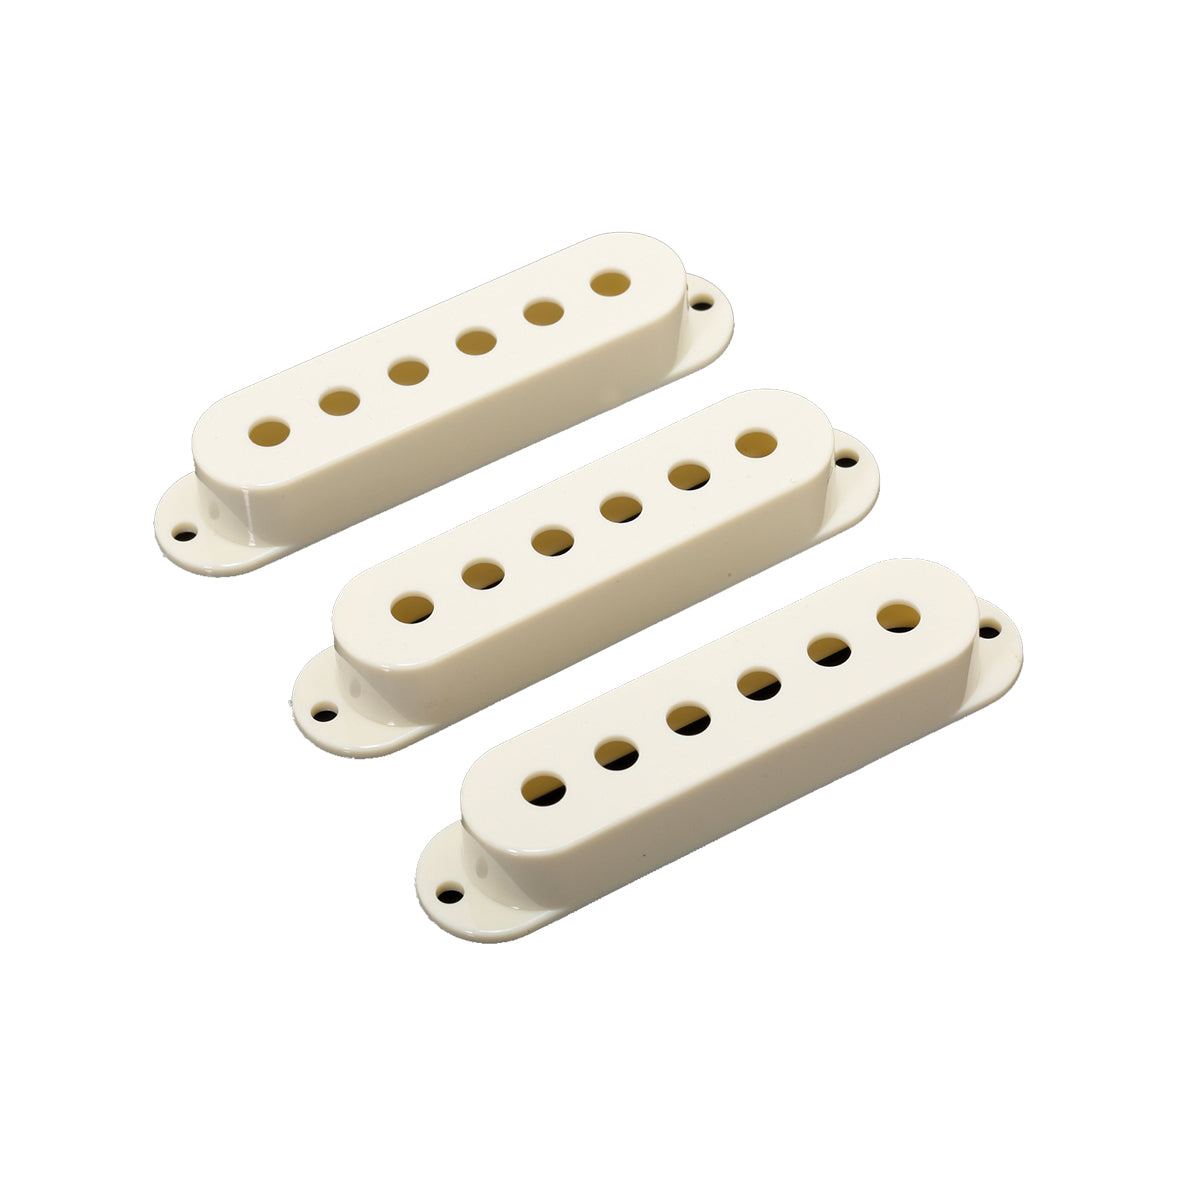 Musiclily Plastic Single Coil Electric Guitar Pickup Covers, Light Cream( 5 Pieces)